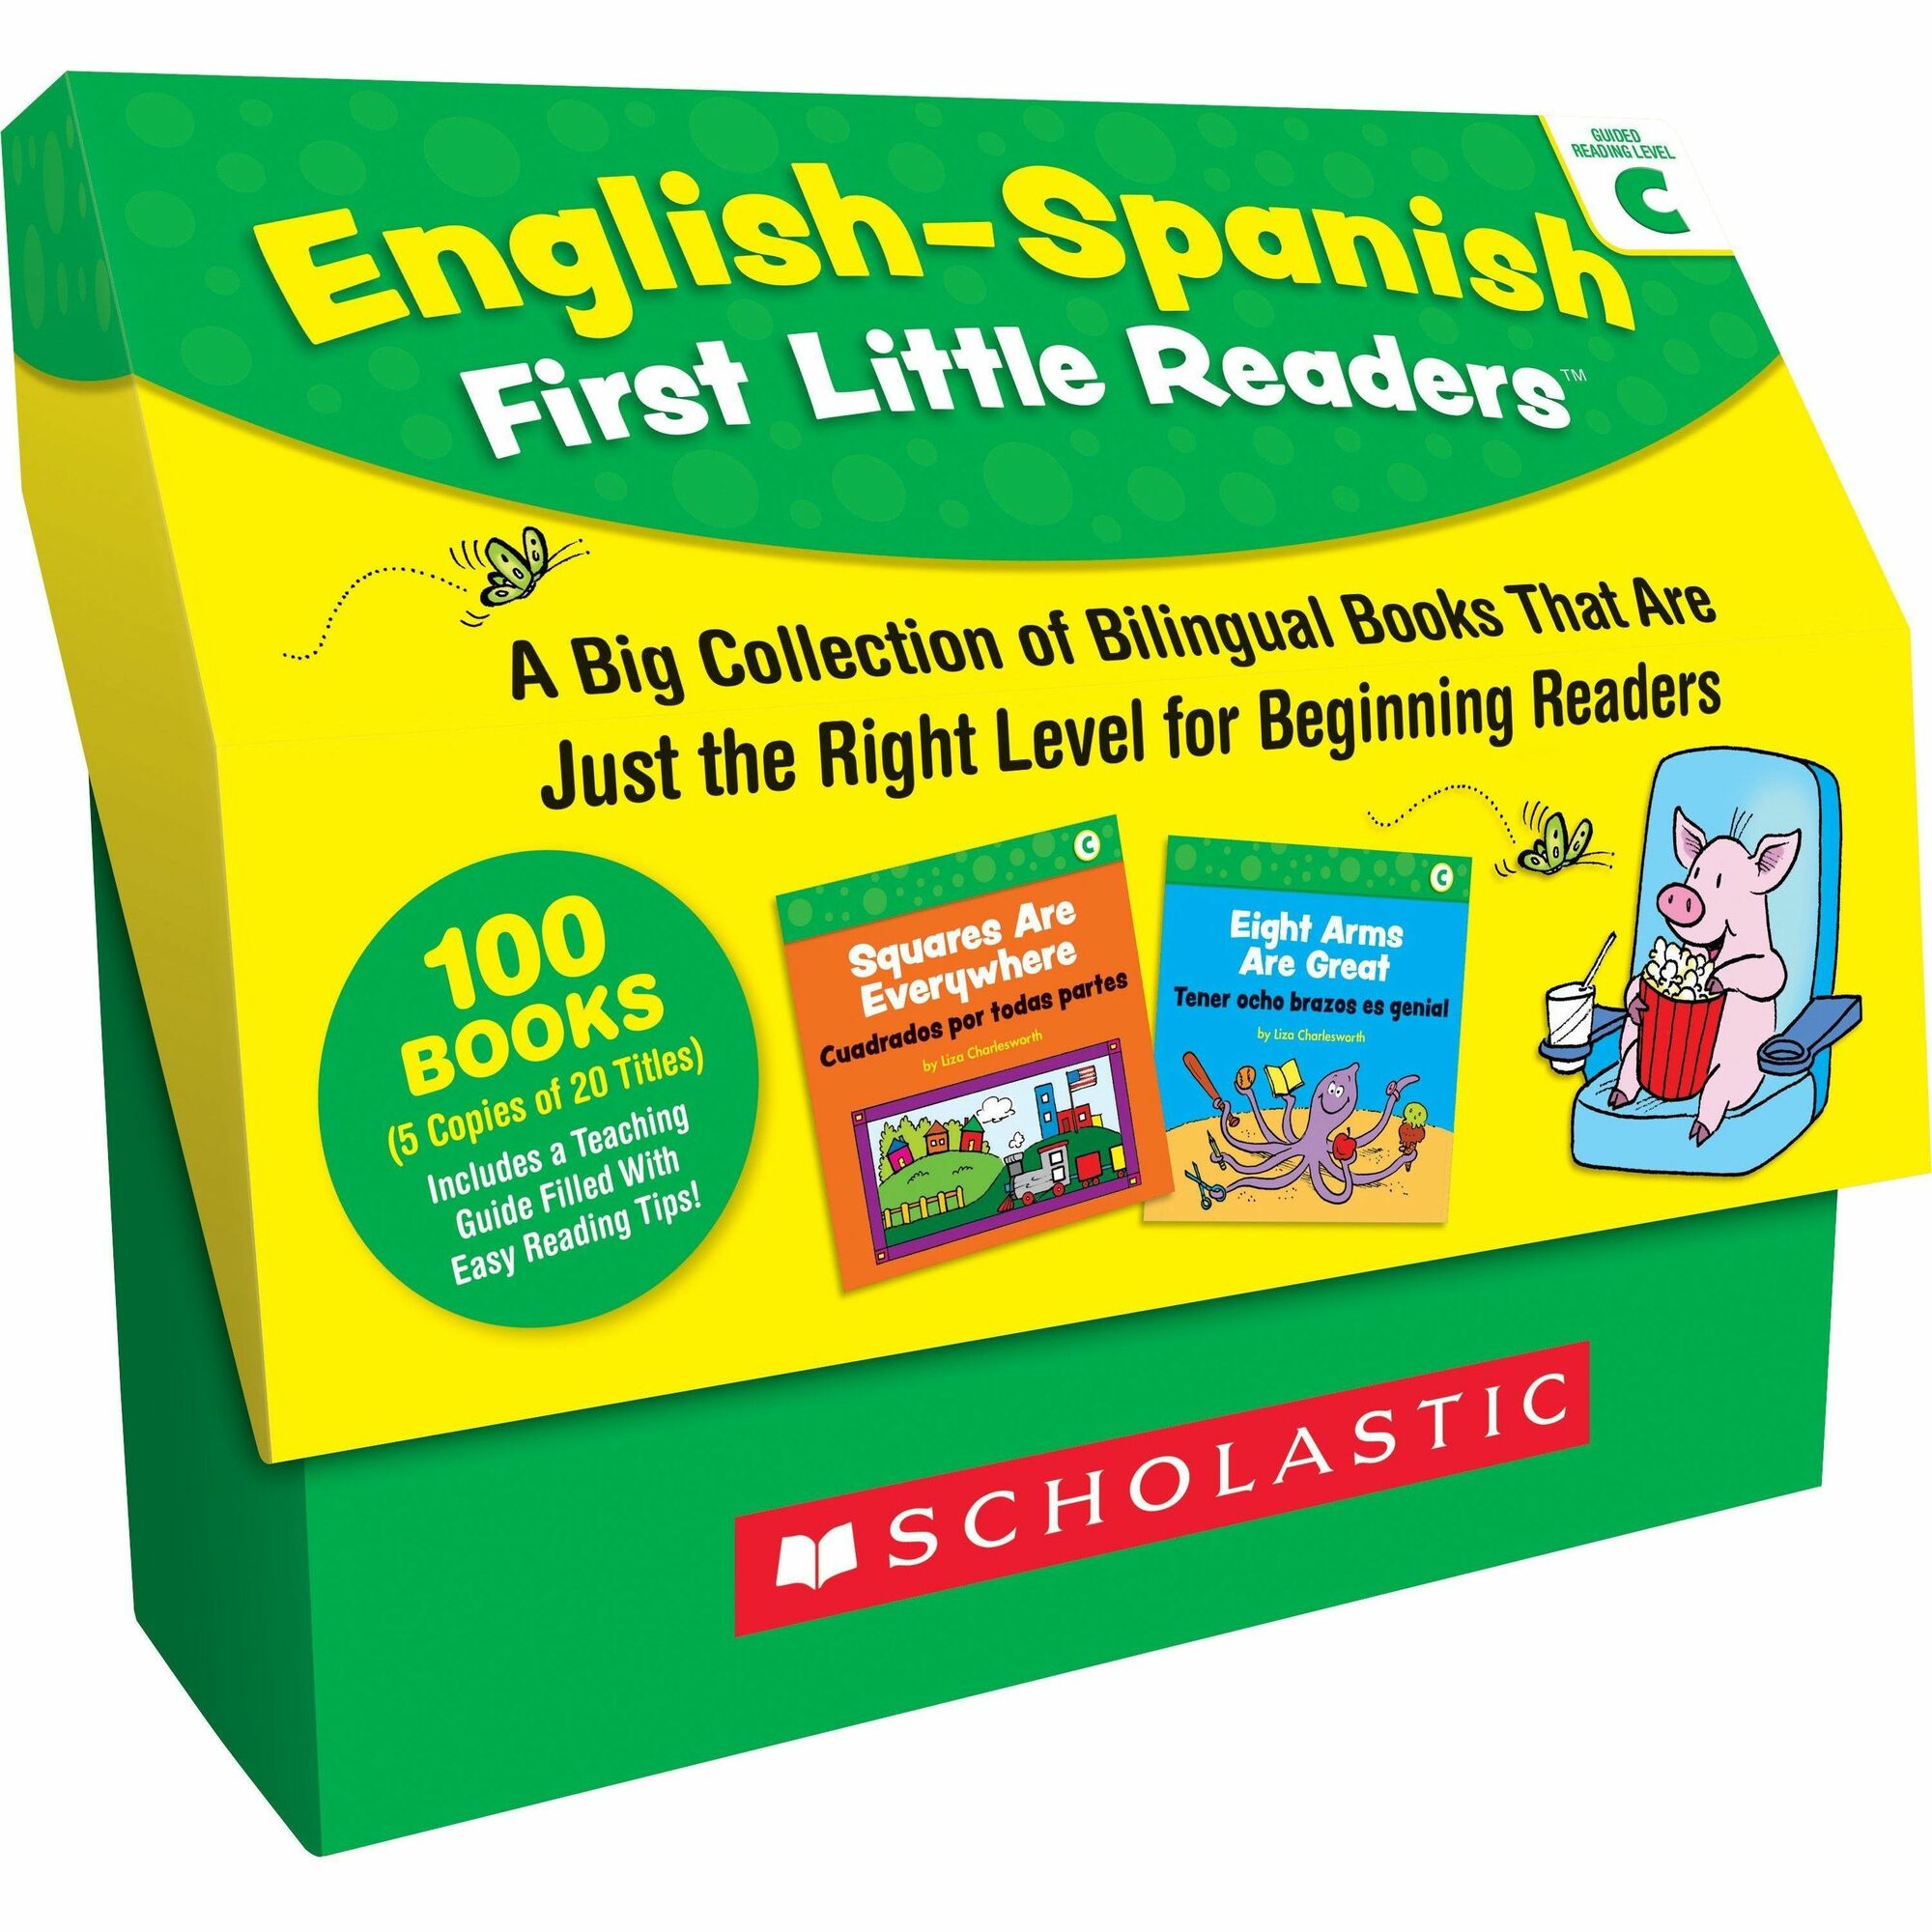 scholastic-first-little-readers-book-set-printed-book-by-liza-charlesworth-8-pages-scholastic-teaching-resources-publication-june-1-2020-book-grade-preschool-2-english-spanish_shs1338668056 - 1